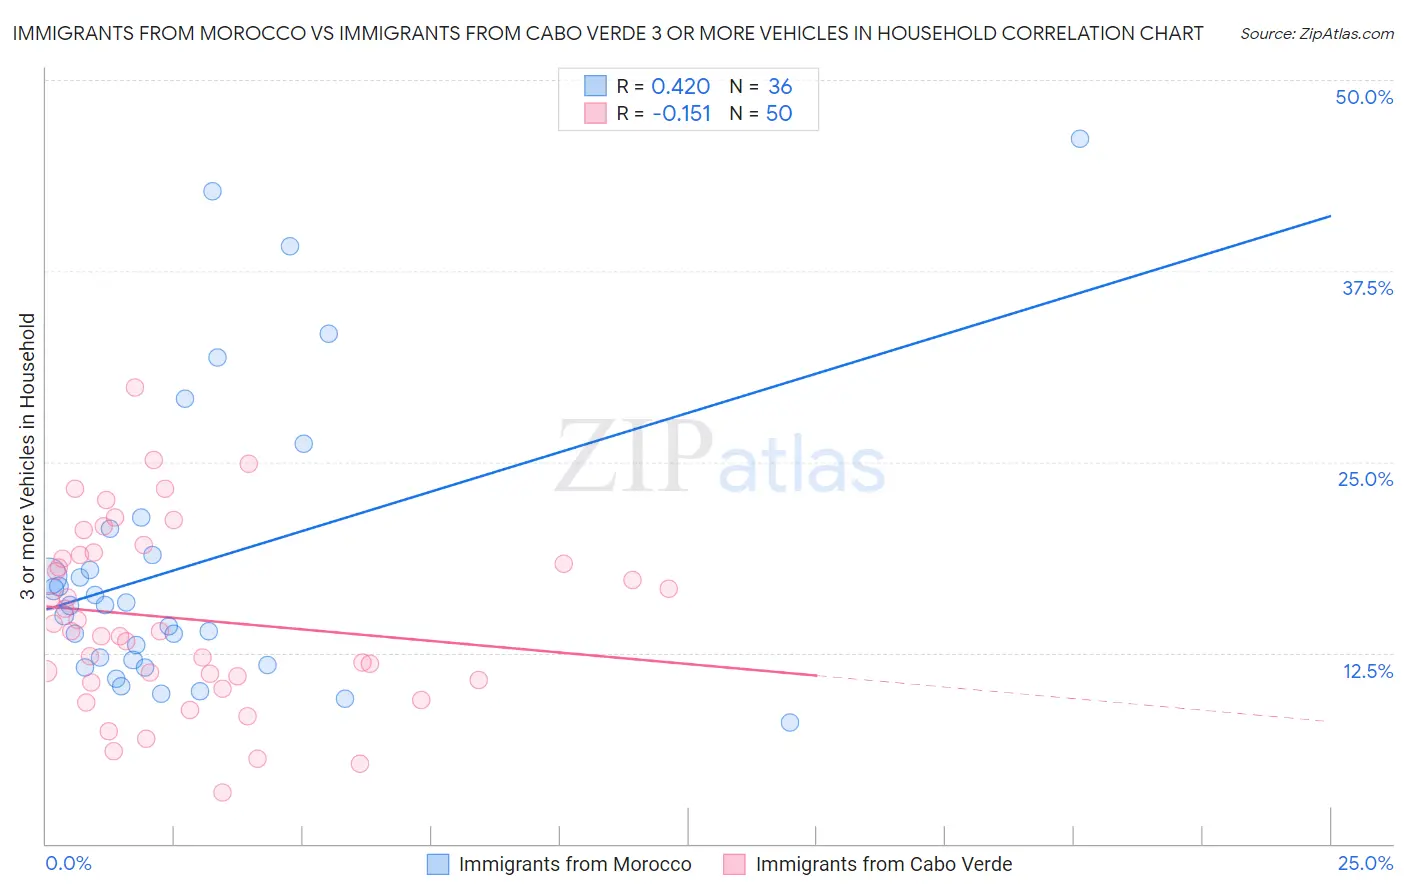 Immigrants from Morocco vs Immigrants from Cabo Verde 3 or more Vehicles in Household